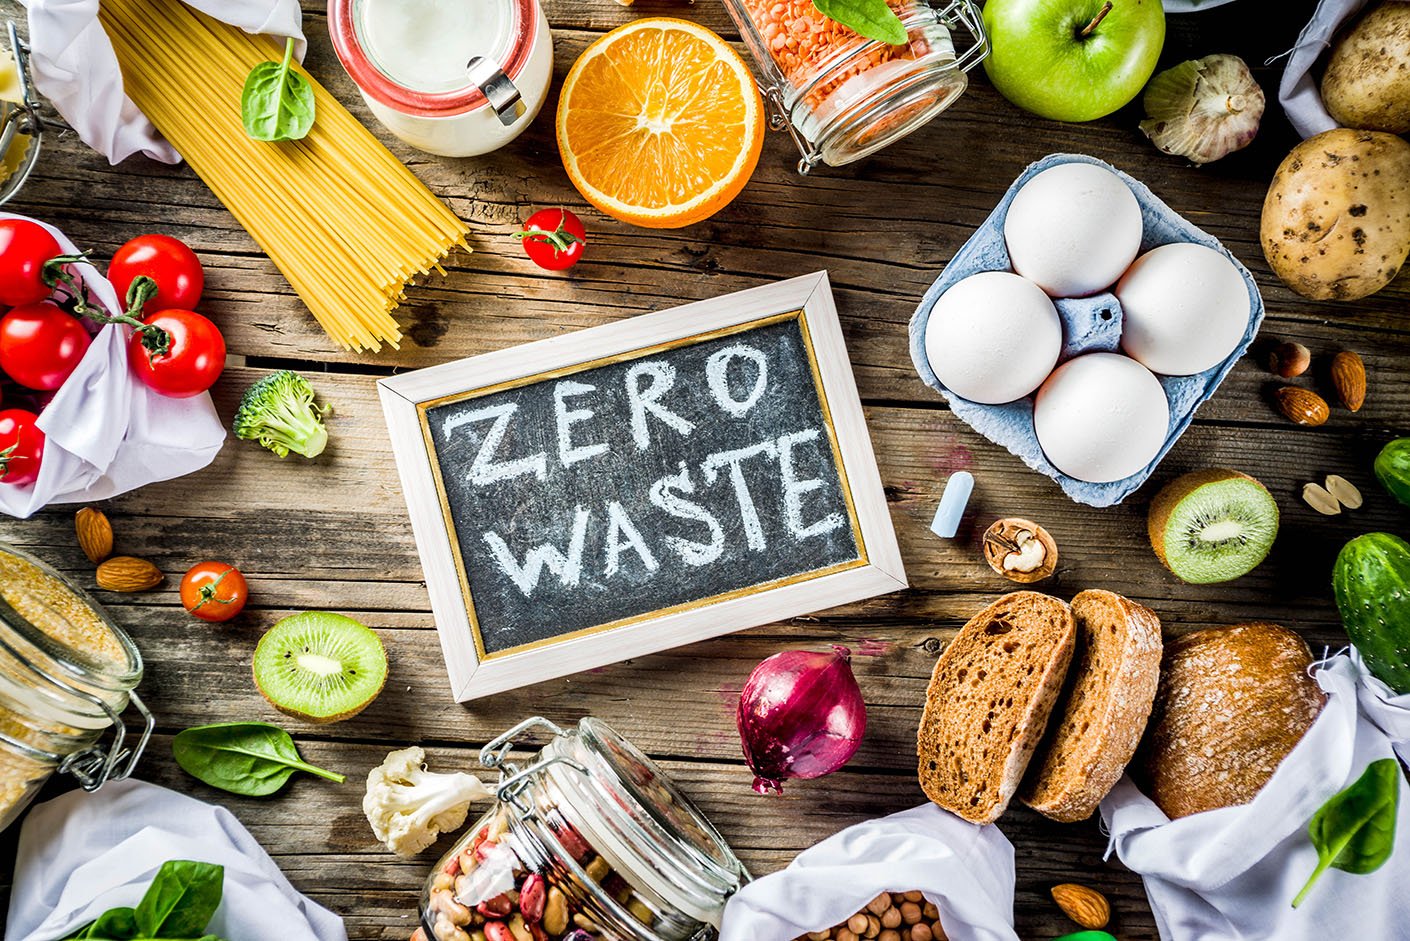 Converting Food Waste to Energy: The South Korea Model